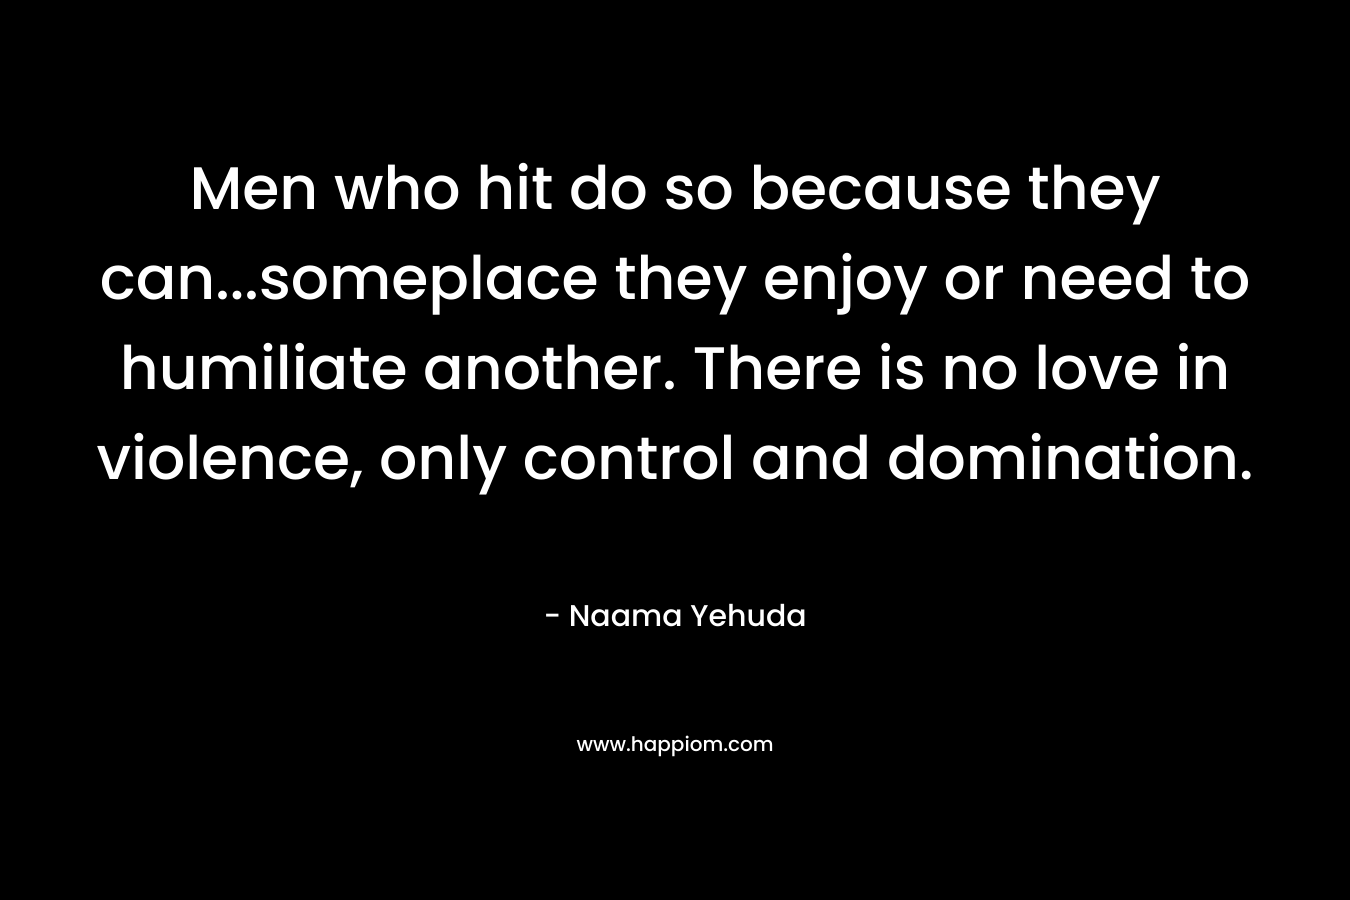 Men who hit do so because they can...someplace they enjoy or need to humiliate another. There is no love in violence, only control and domination.